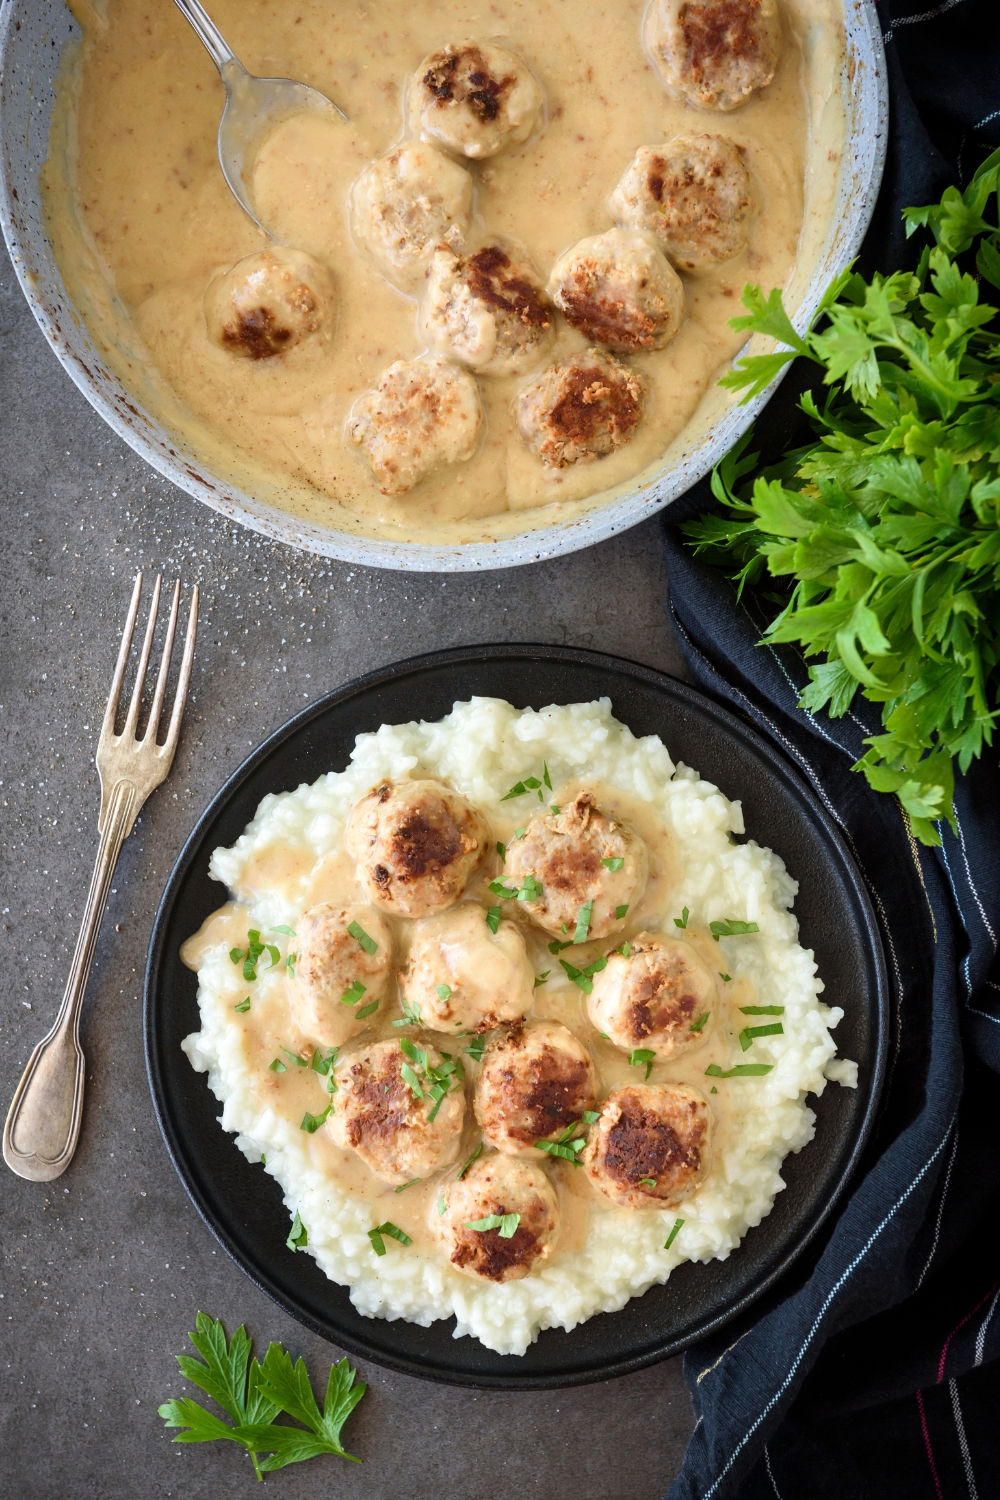 A plate of meatballs covered in fresh herbs and a creamy gravy on a bed of white rice. The rest of the meatballs and sauce are in a skillet next to the plate.